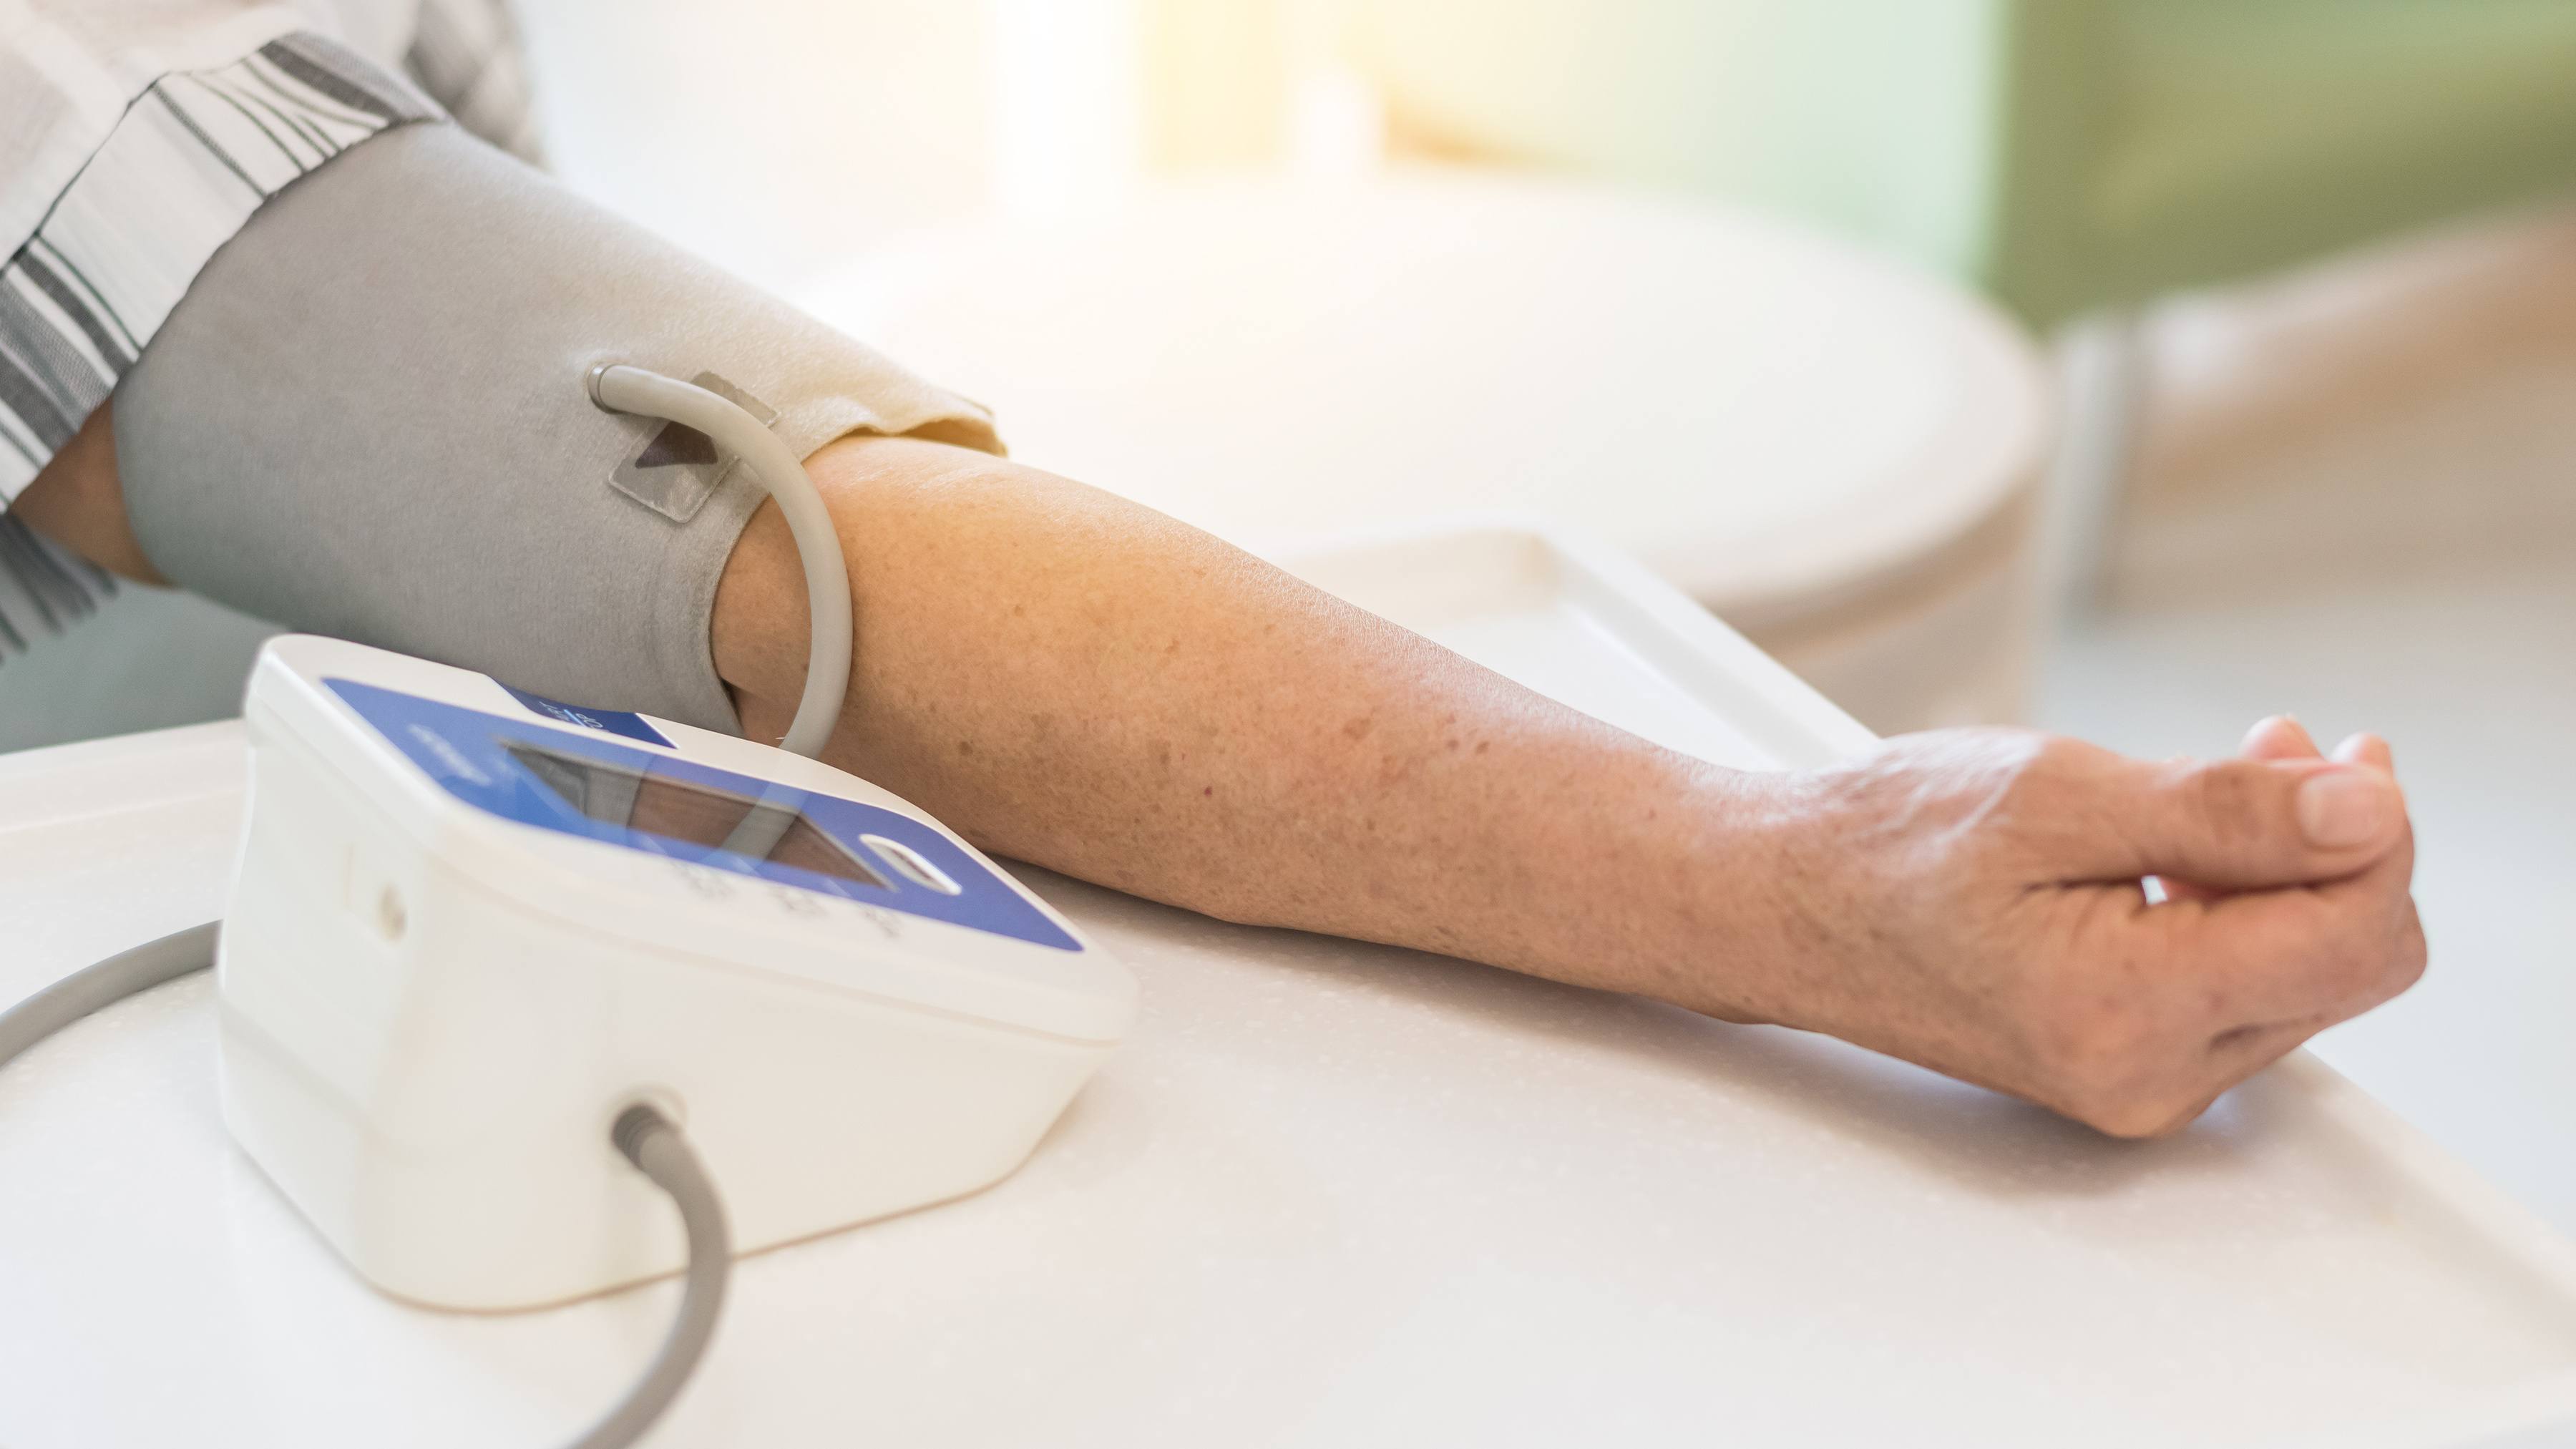 Wrist Vs Upper Arm Blood Pressure Monitor: Which is More Accurate?